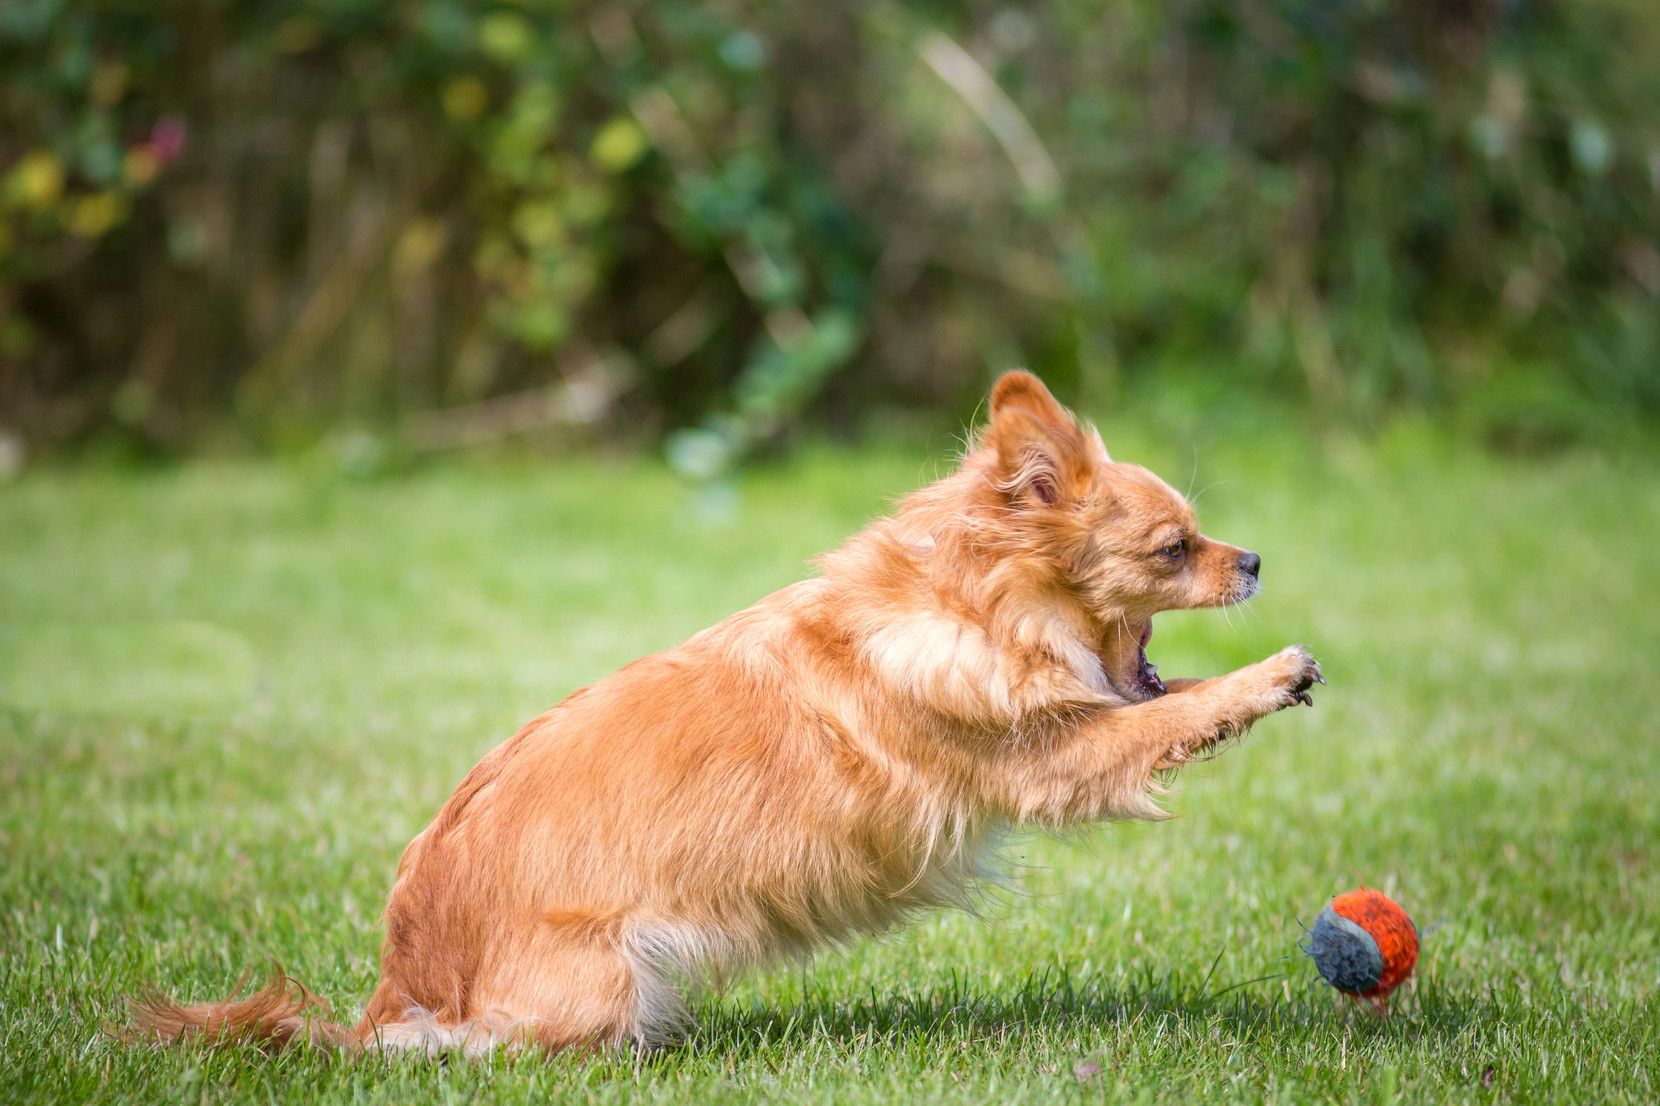 A small brown dog jumps on a tennis ball.